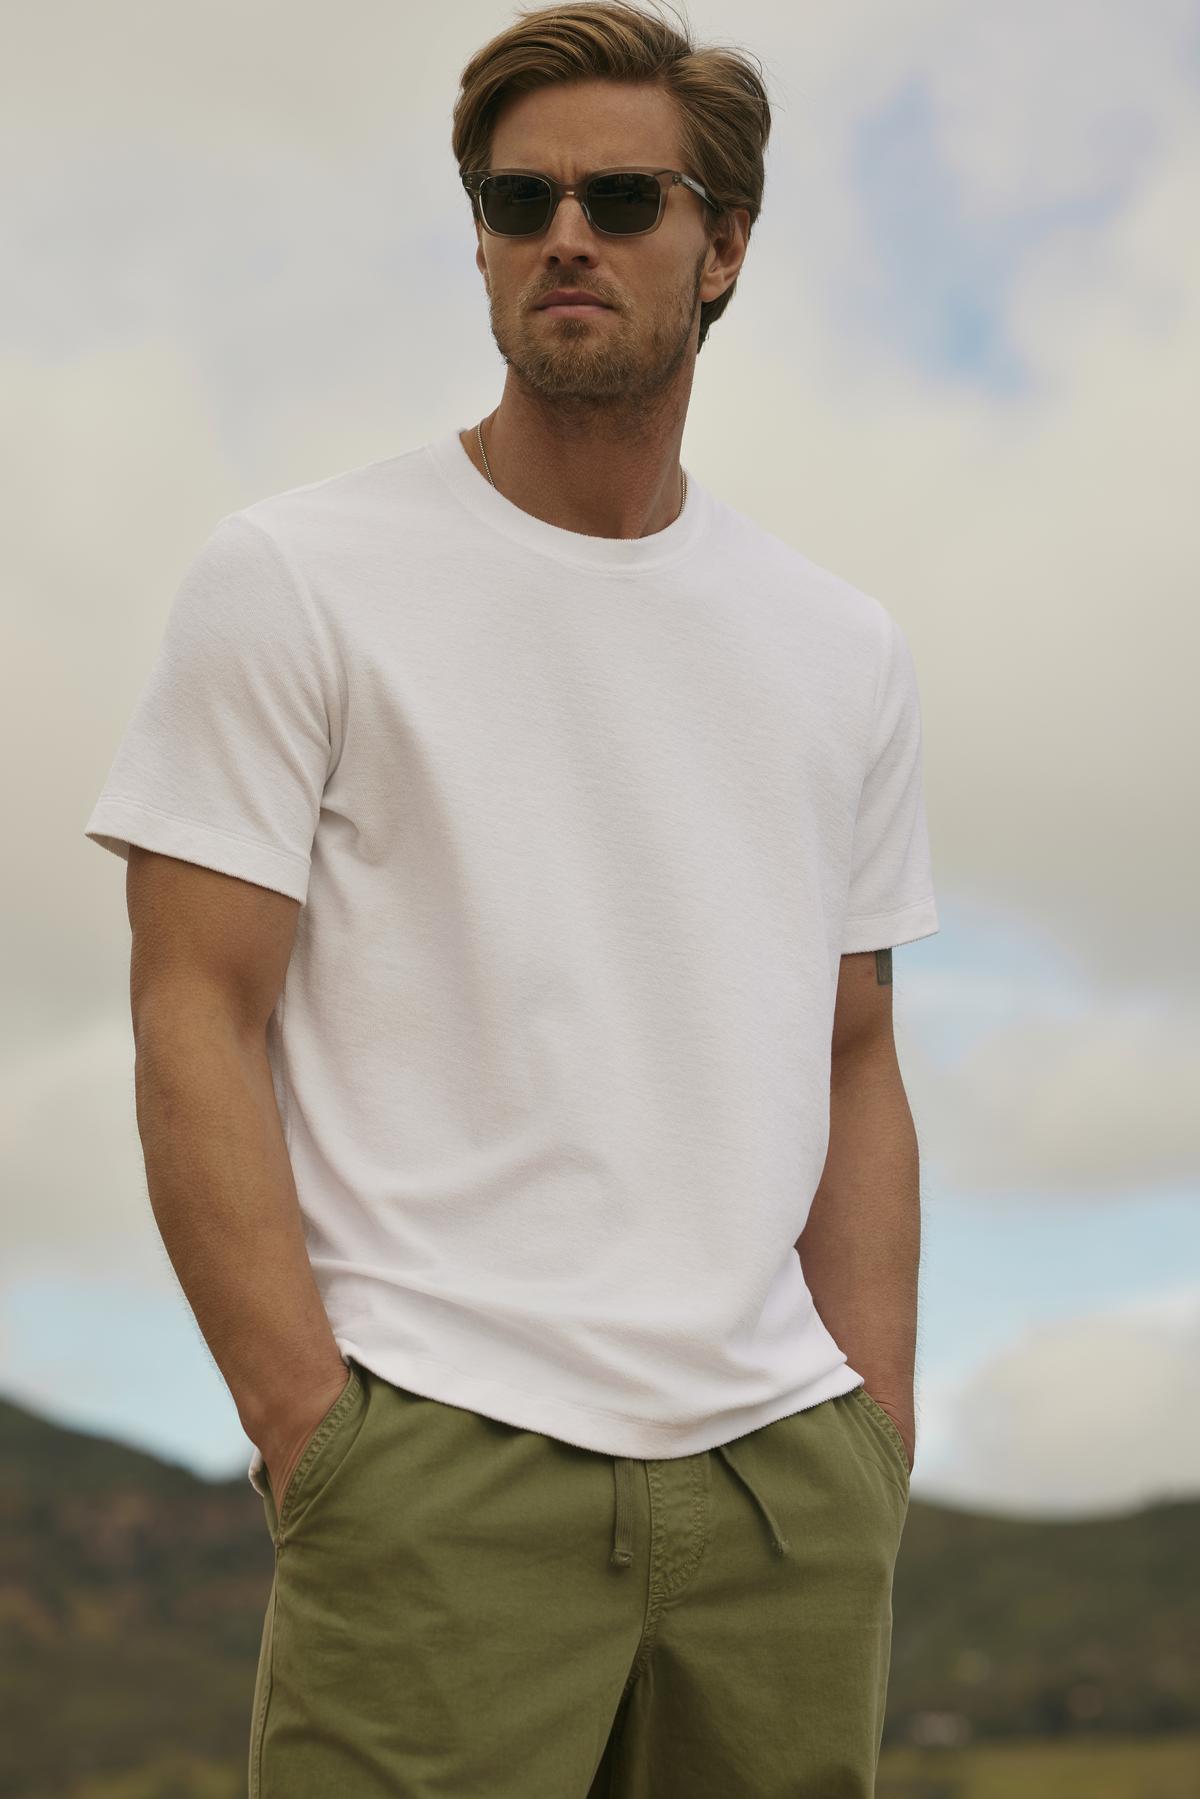 A man wearing JAXON CREW sunglasses and a white t-shirt stands with hands on hips against a hilly landscape.-36753592451265